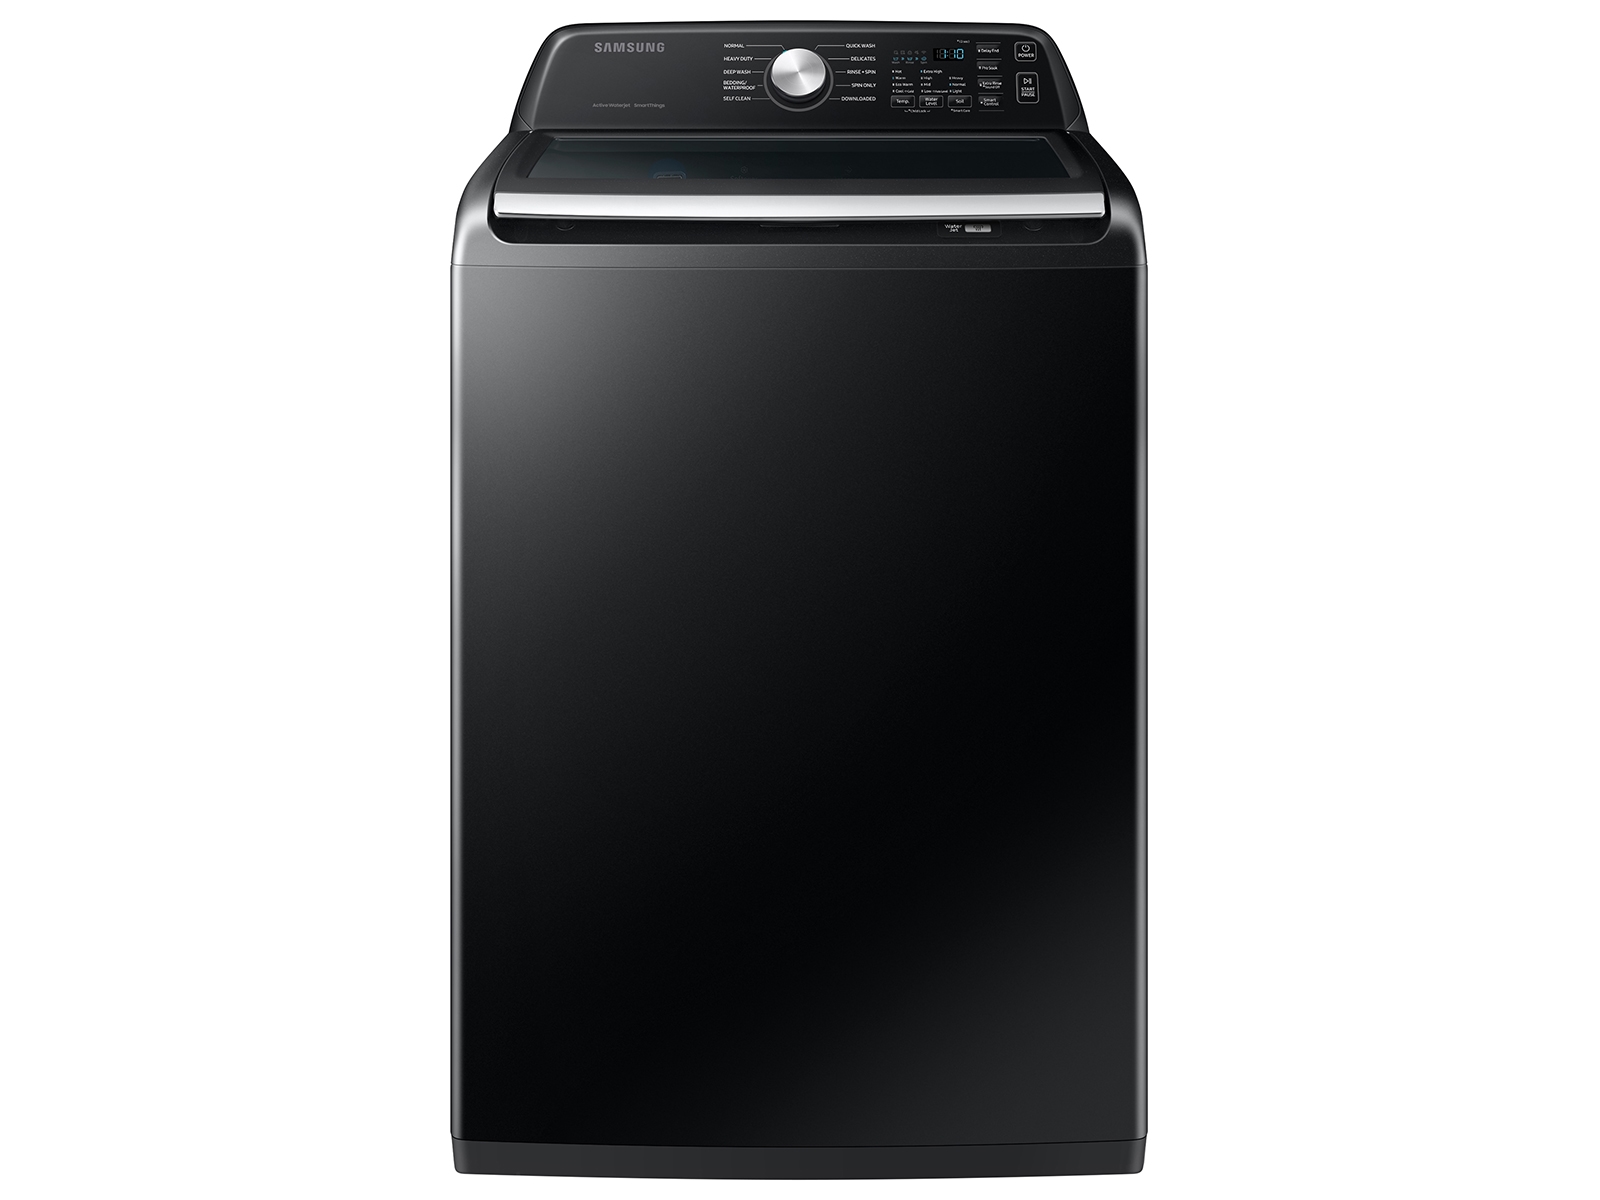 Samsung 4.6 cu. ft. Large Capacity Smart Top Load Washer with 